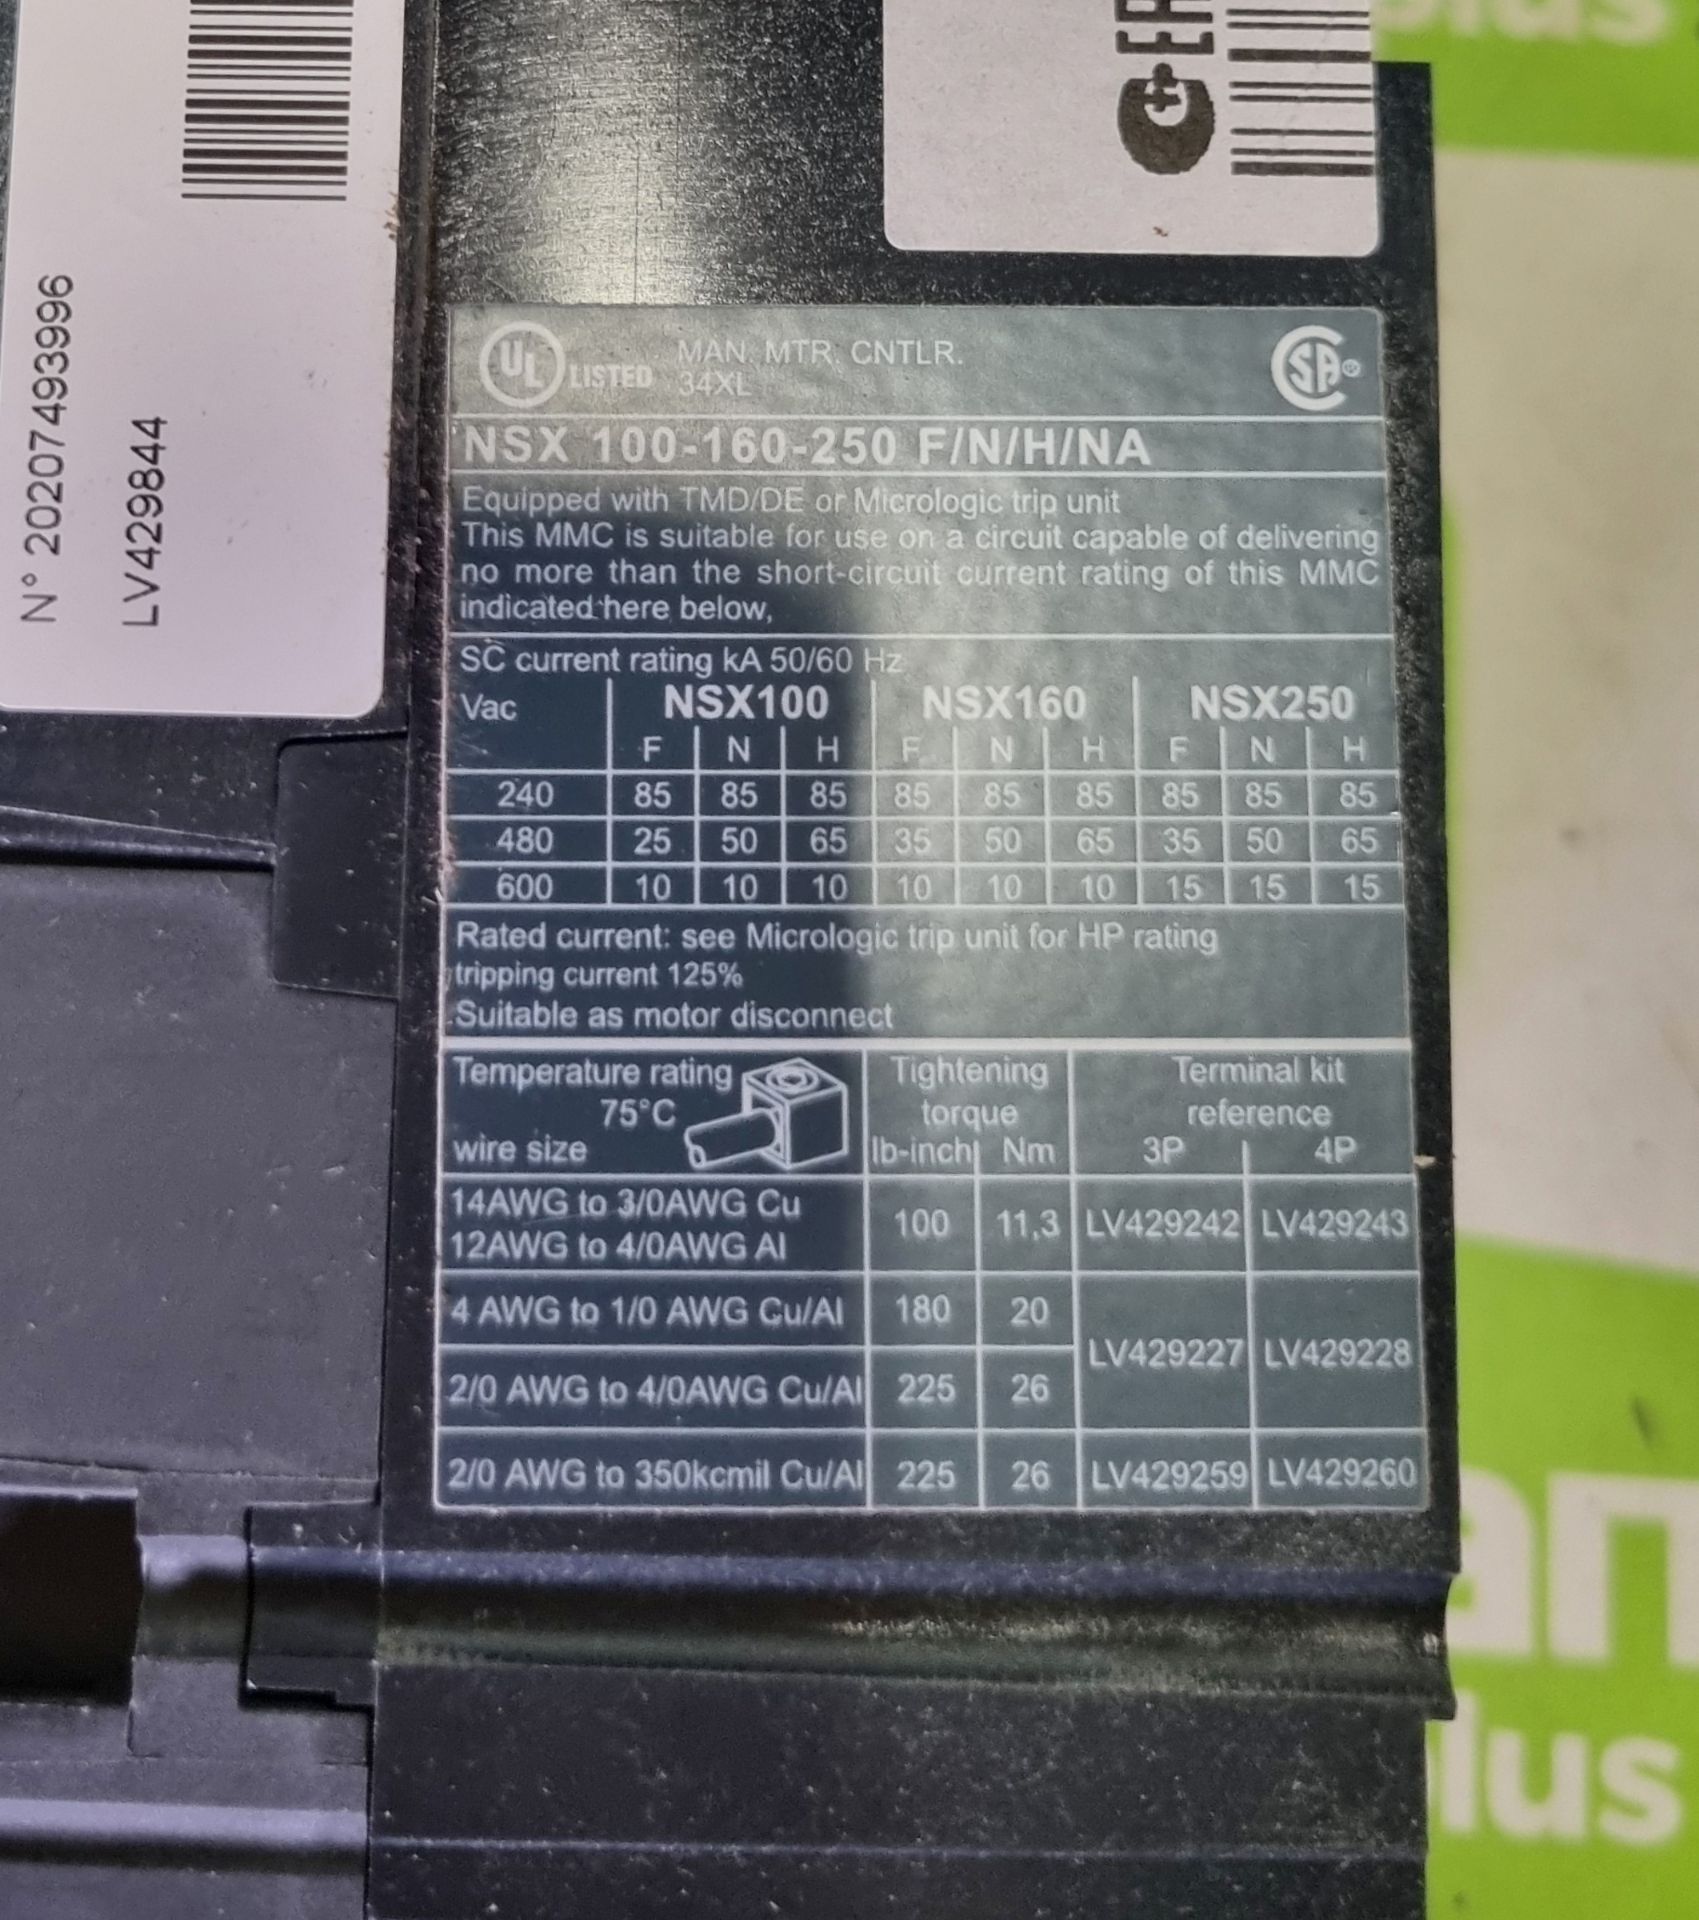 Schneider Electric MGP0403XN Powerpact 4 molded case circuit breaker - 3 phase - 415V - 40A - Image 5 of 5